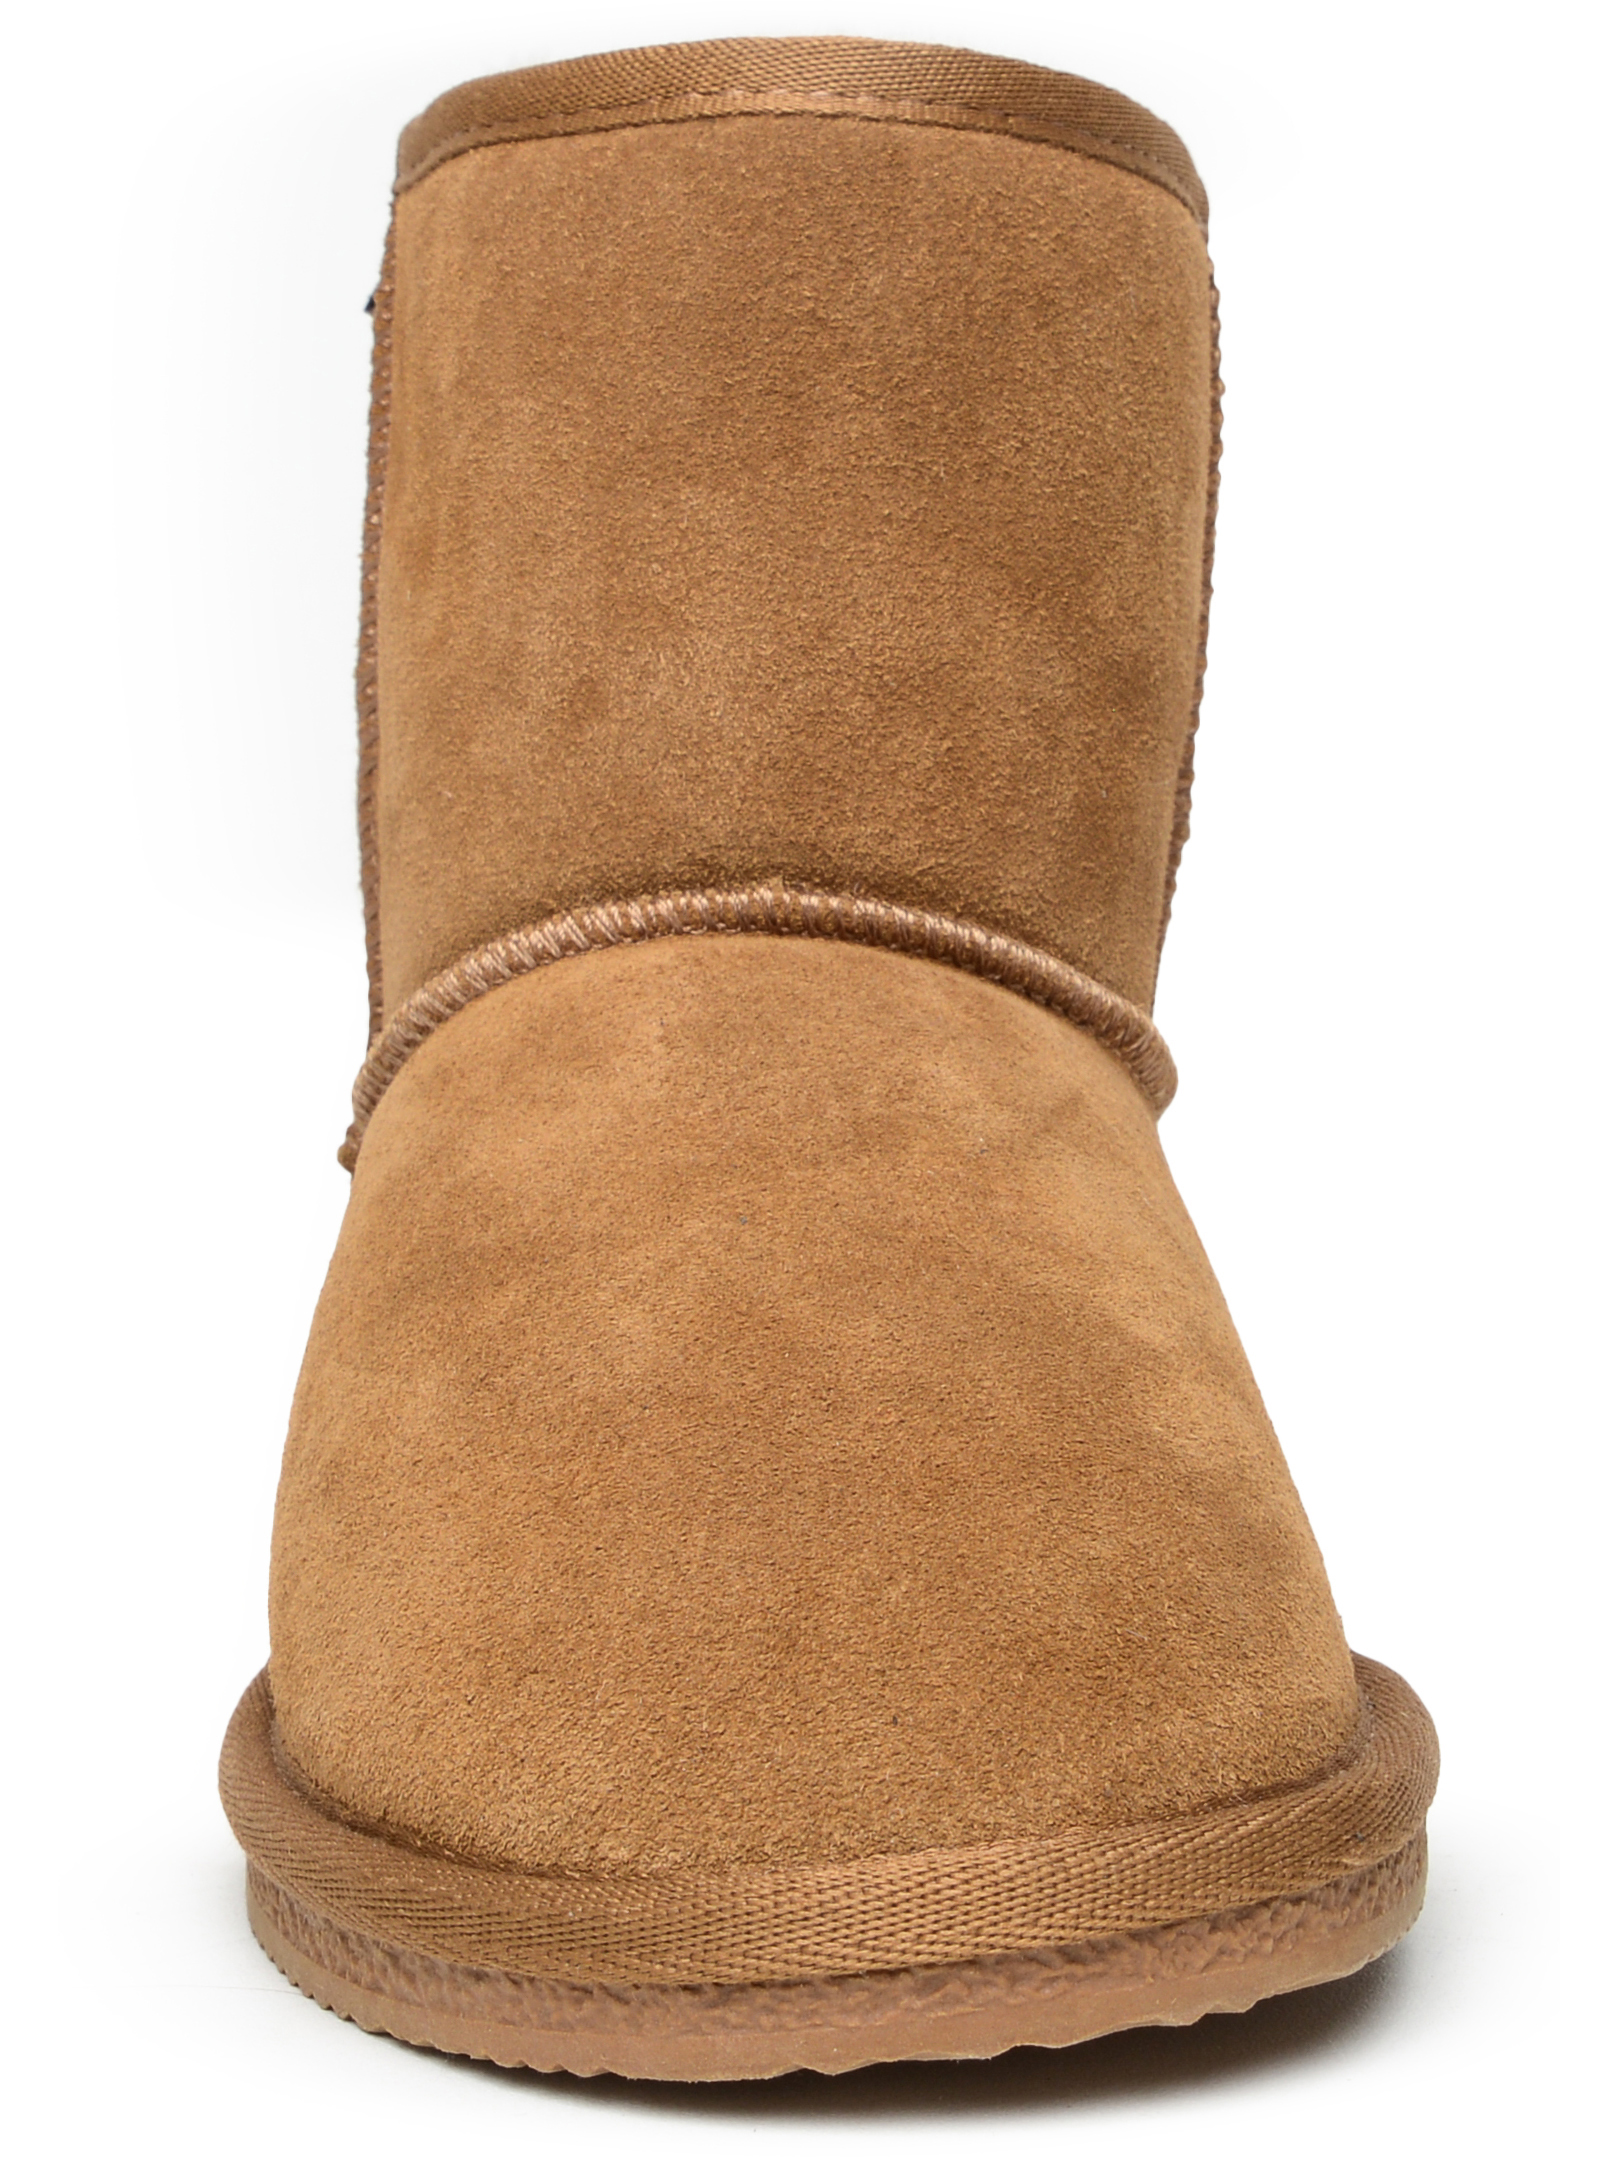 Portland Boot Company Women's Short Cozy Suede Boot - image 4 of 5